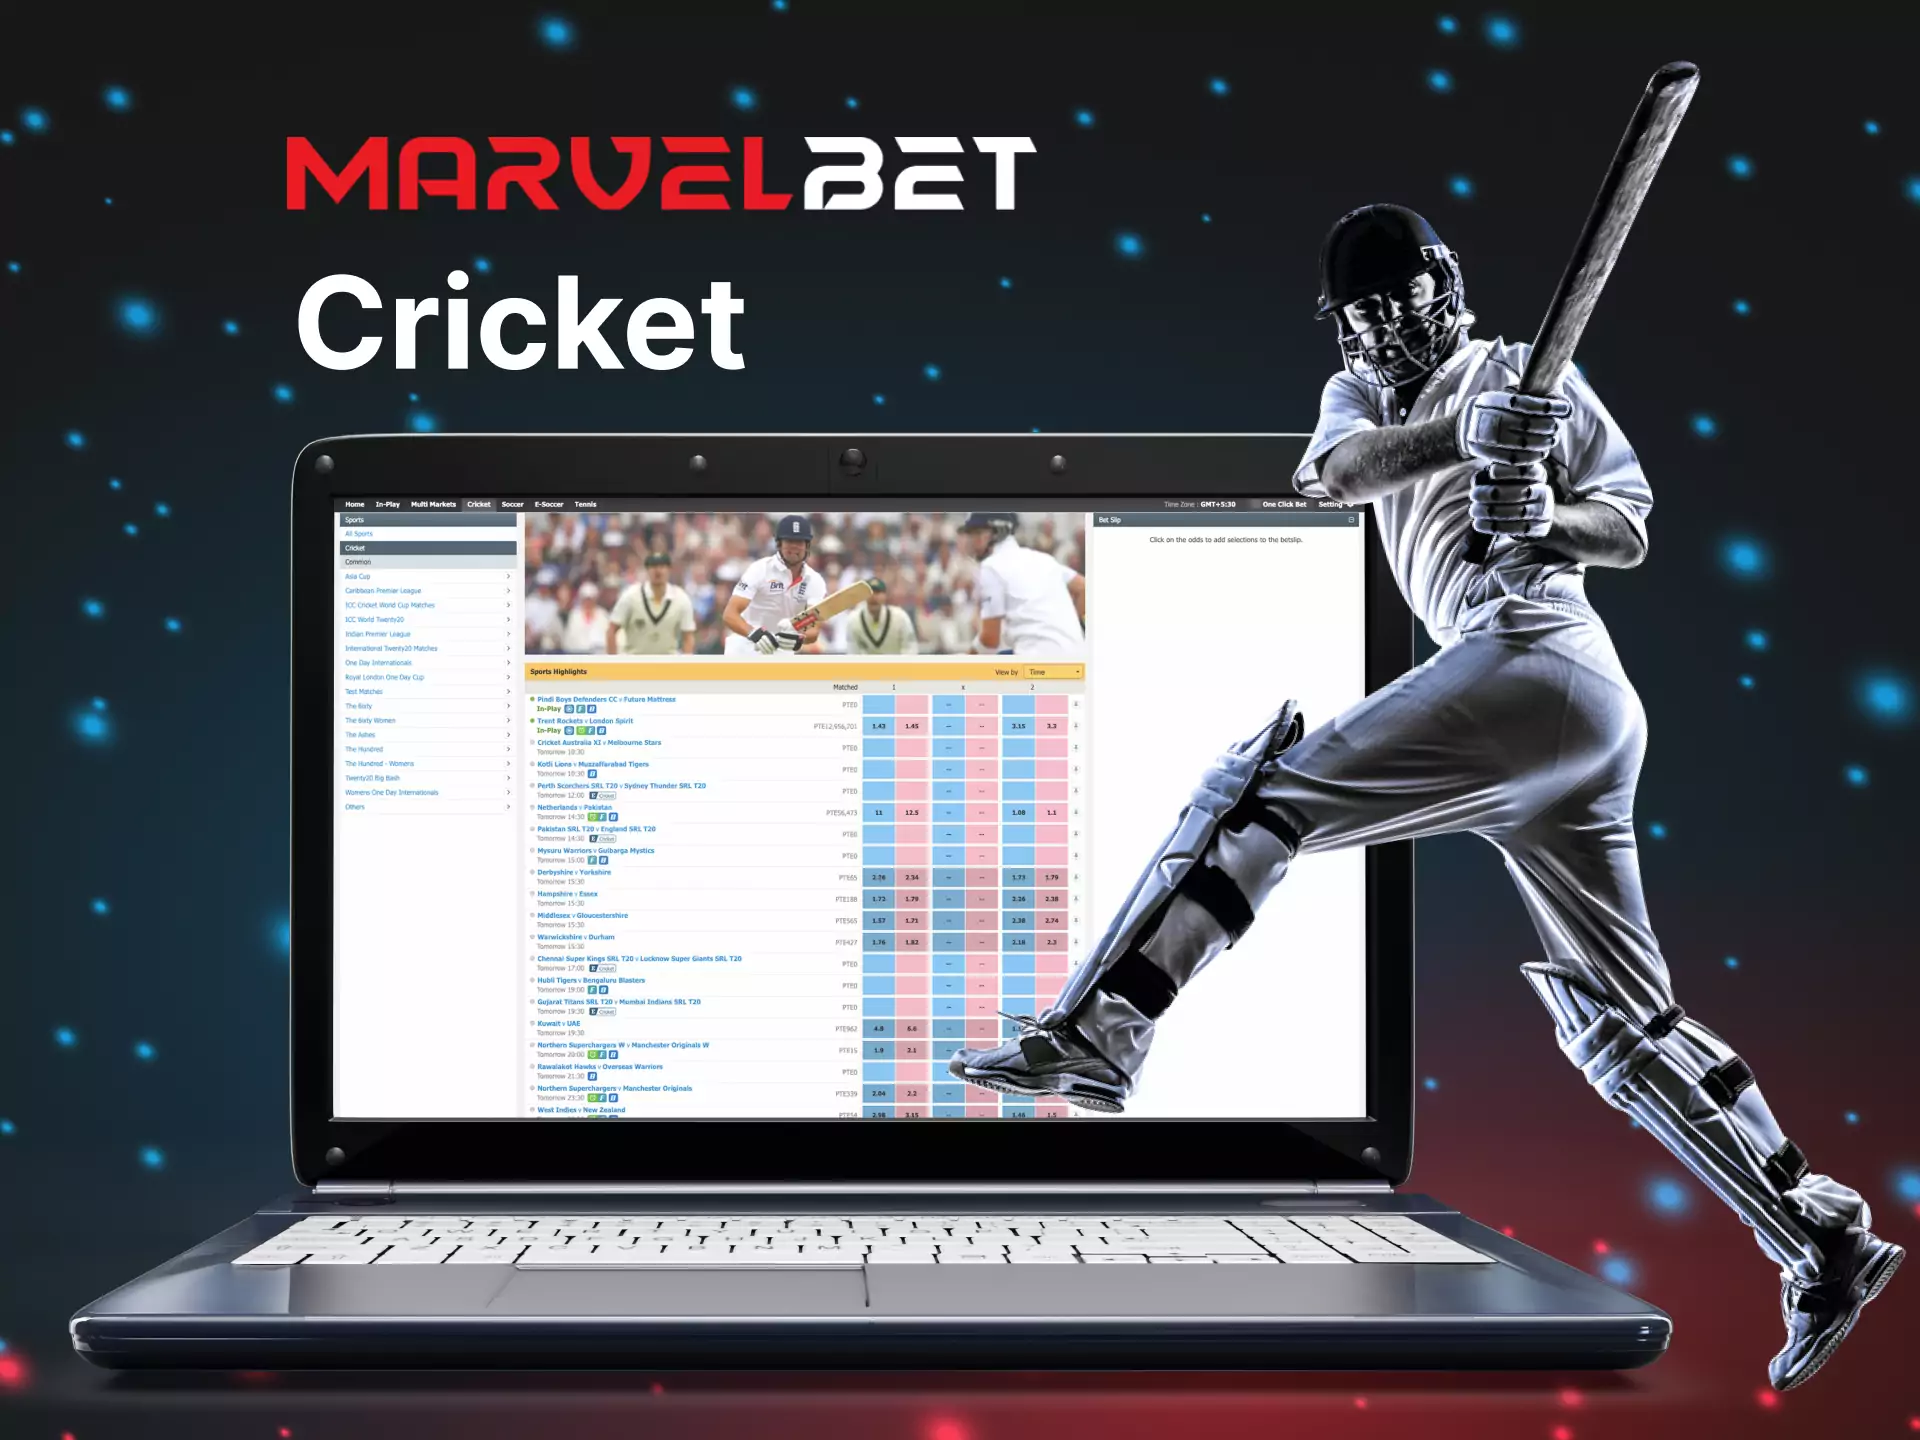 Cricket betting is the most popular activity on Marvelbet among Indian users.